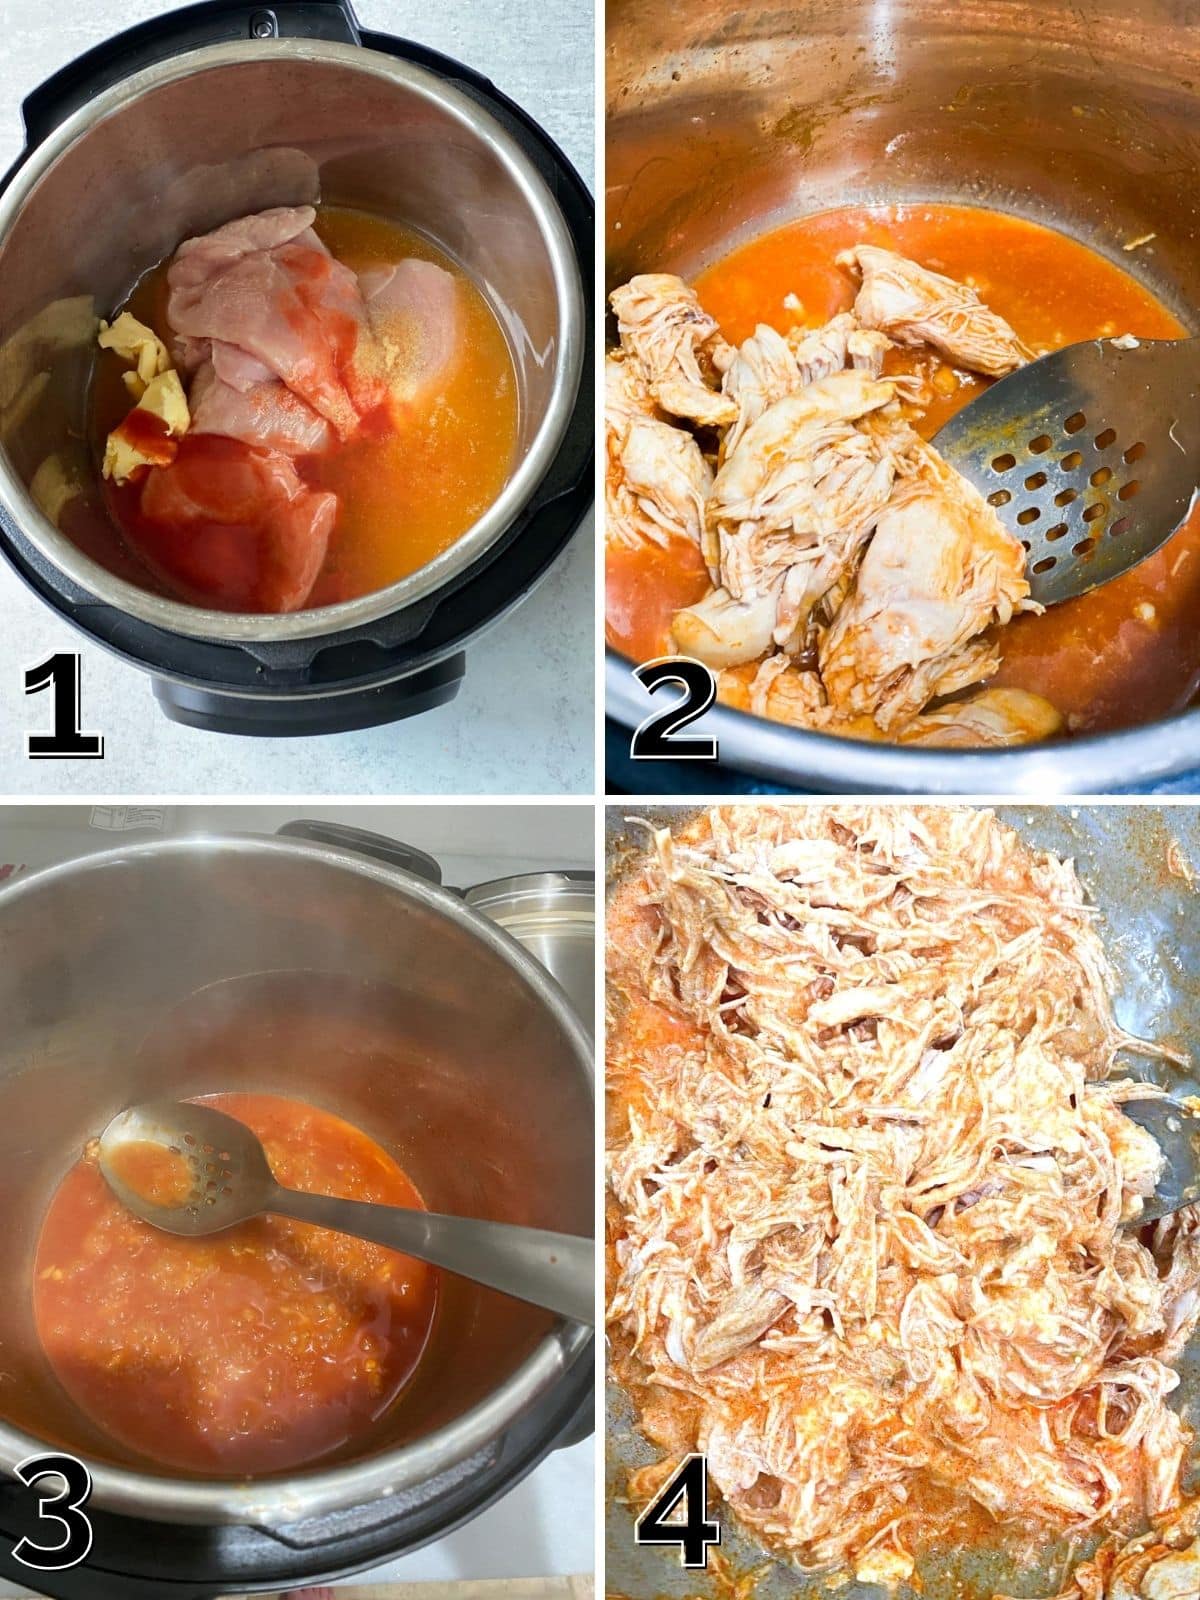 Step by step process shots of making shredded buffalo chicken in an instant pot.